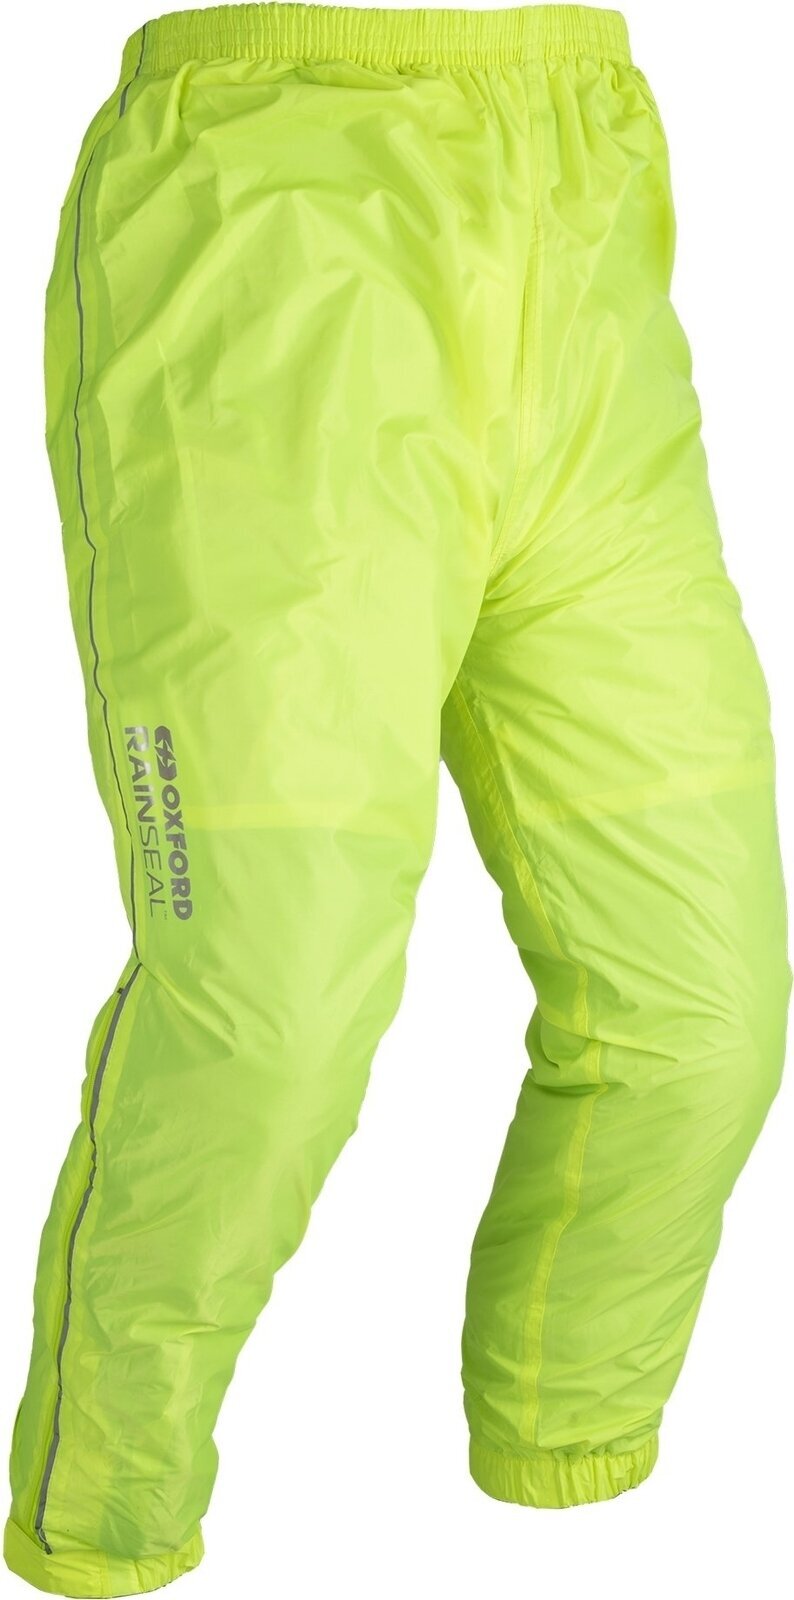 Motorcycle Rain Pants Oxford Rainseal Over Trousers Fluo S